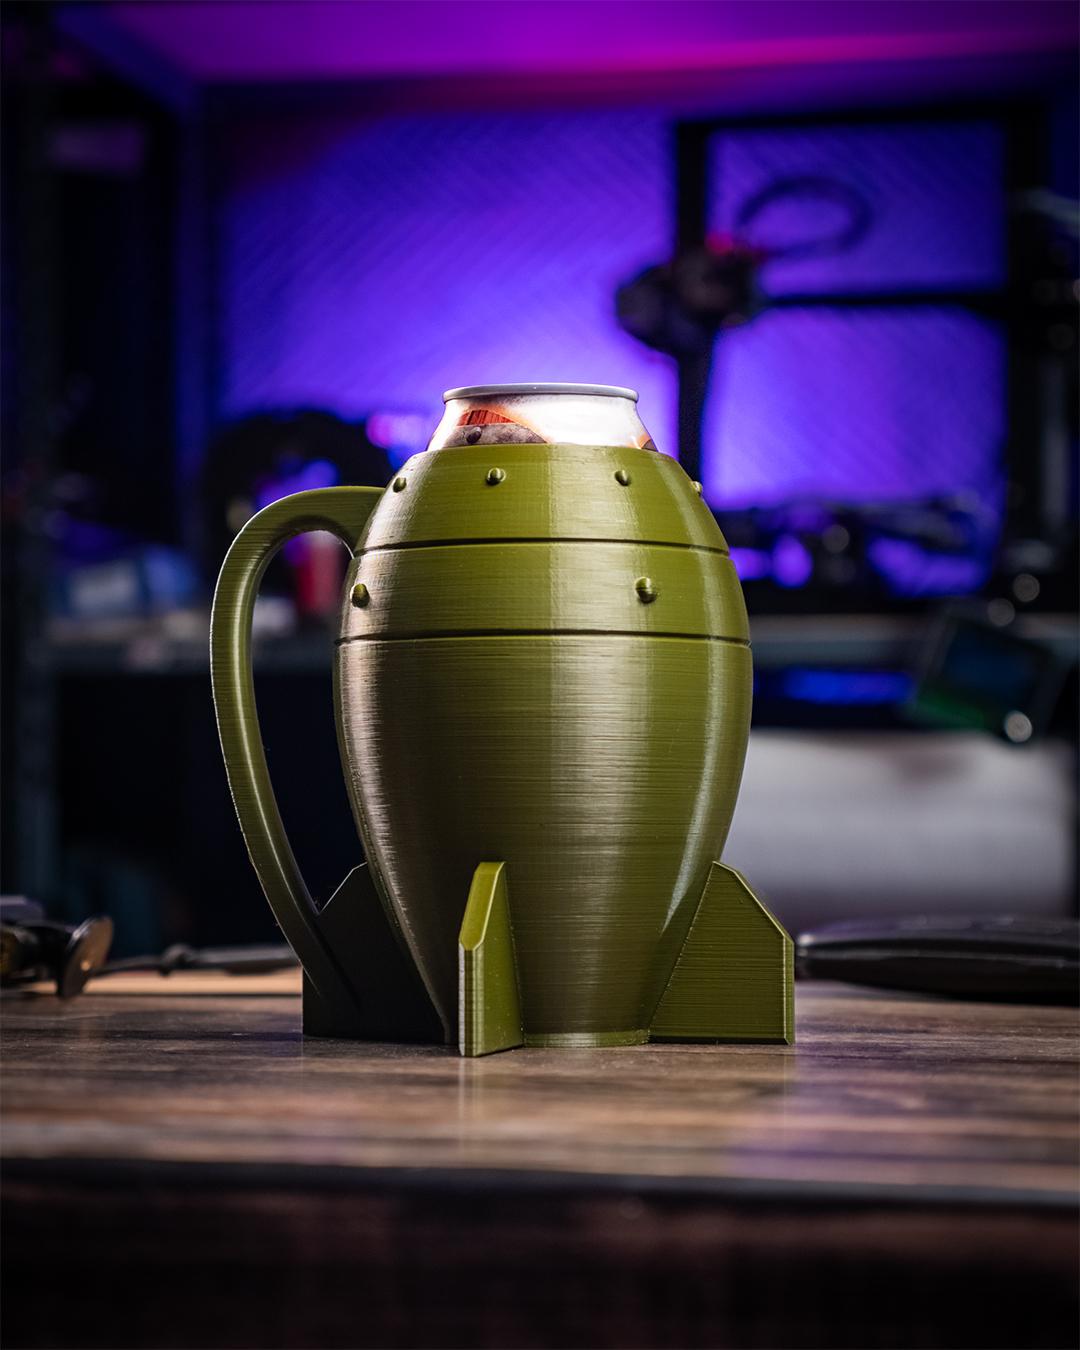 12oz Mini Nuke - Fallout 4 Can Cup! - 3D Printed "Mini Nuke" can cup for 12oz Cans! - 3d model